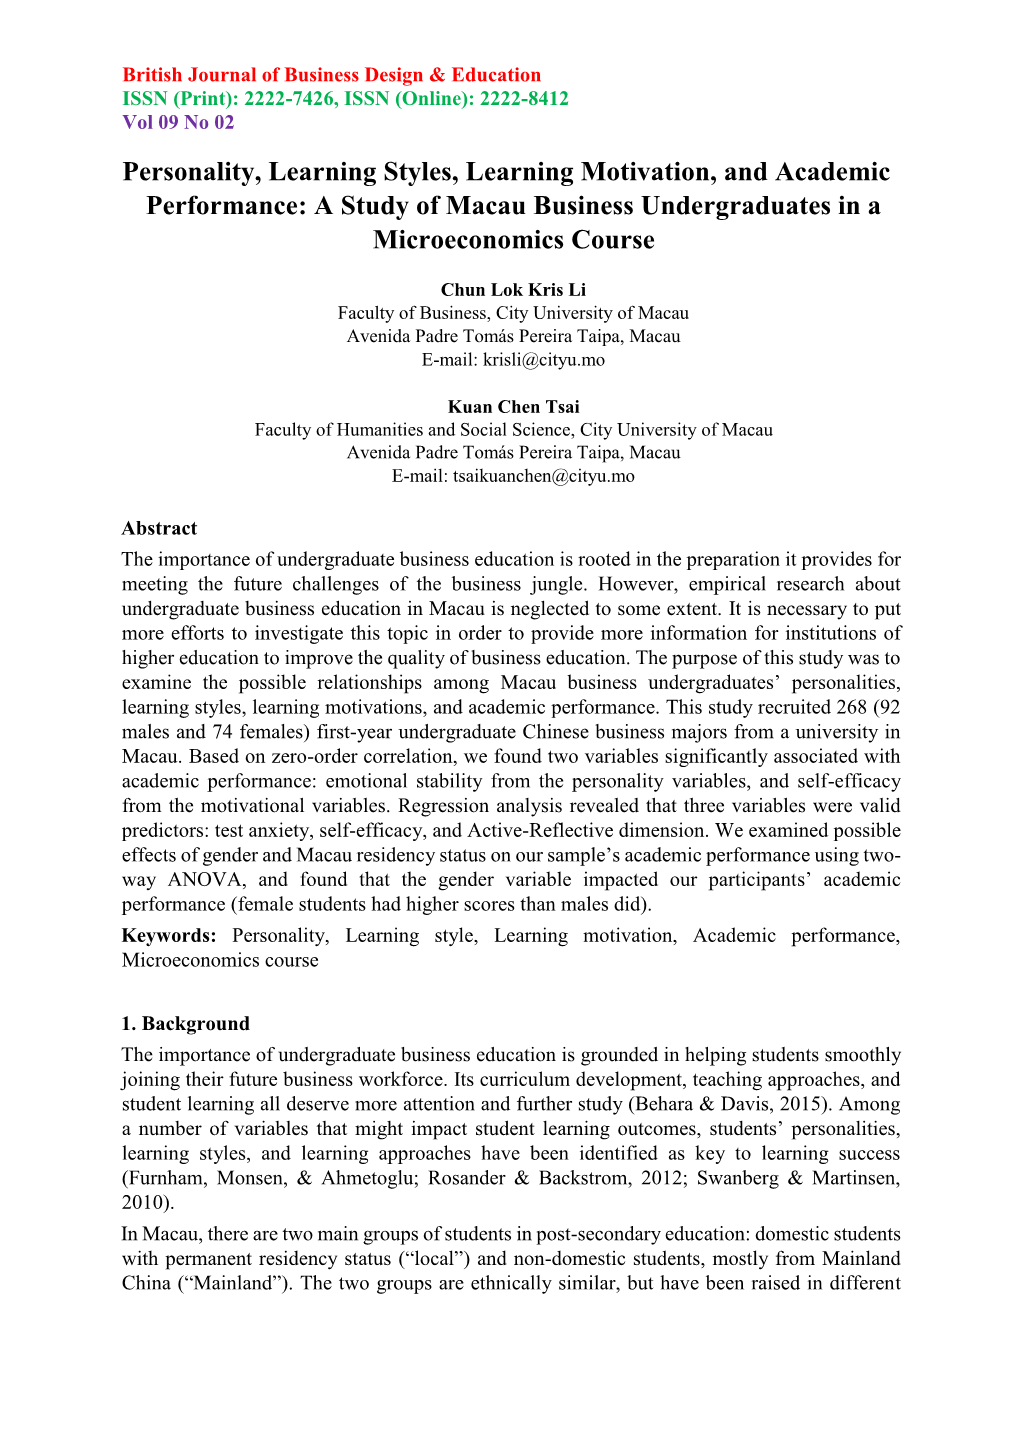 Personality, Learning Styles, Learning Motivation, and Academic Performance: a Study of Macau Business Undergraduates in a Microeconomics Course